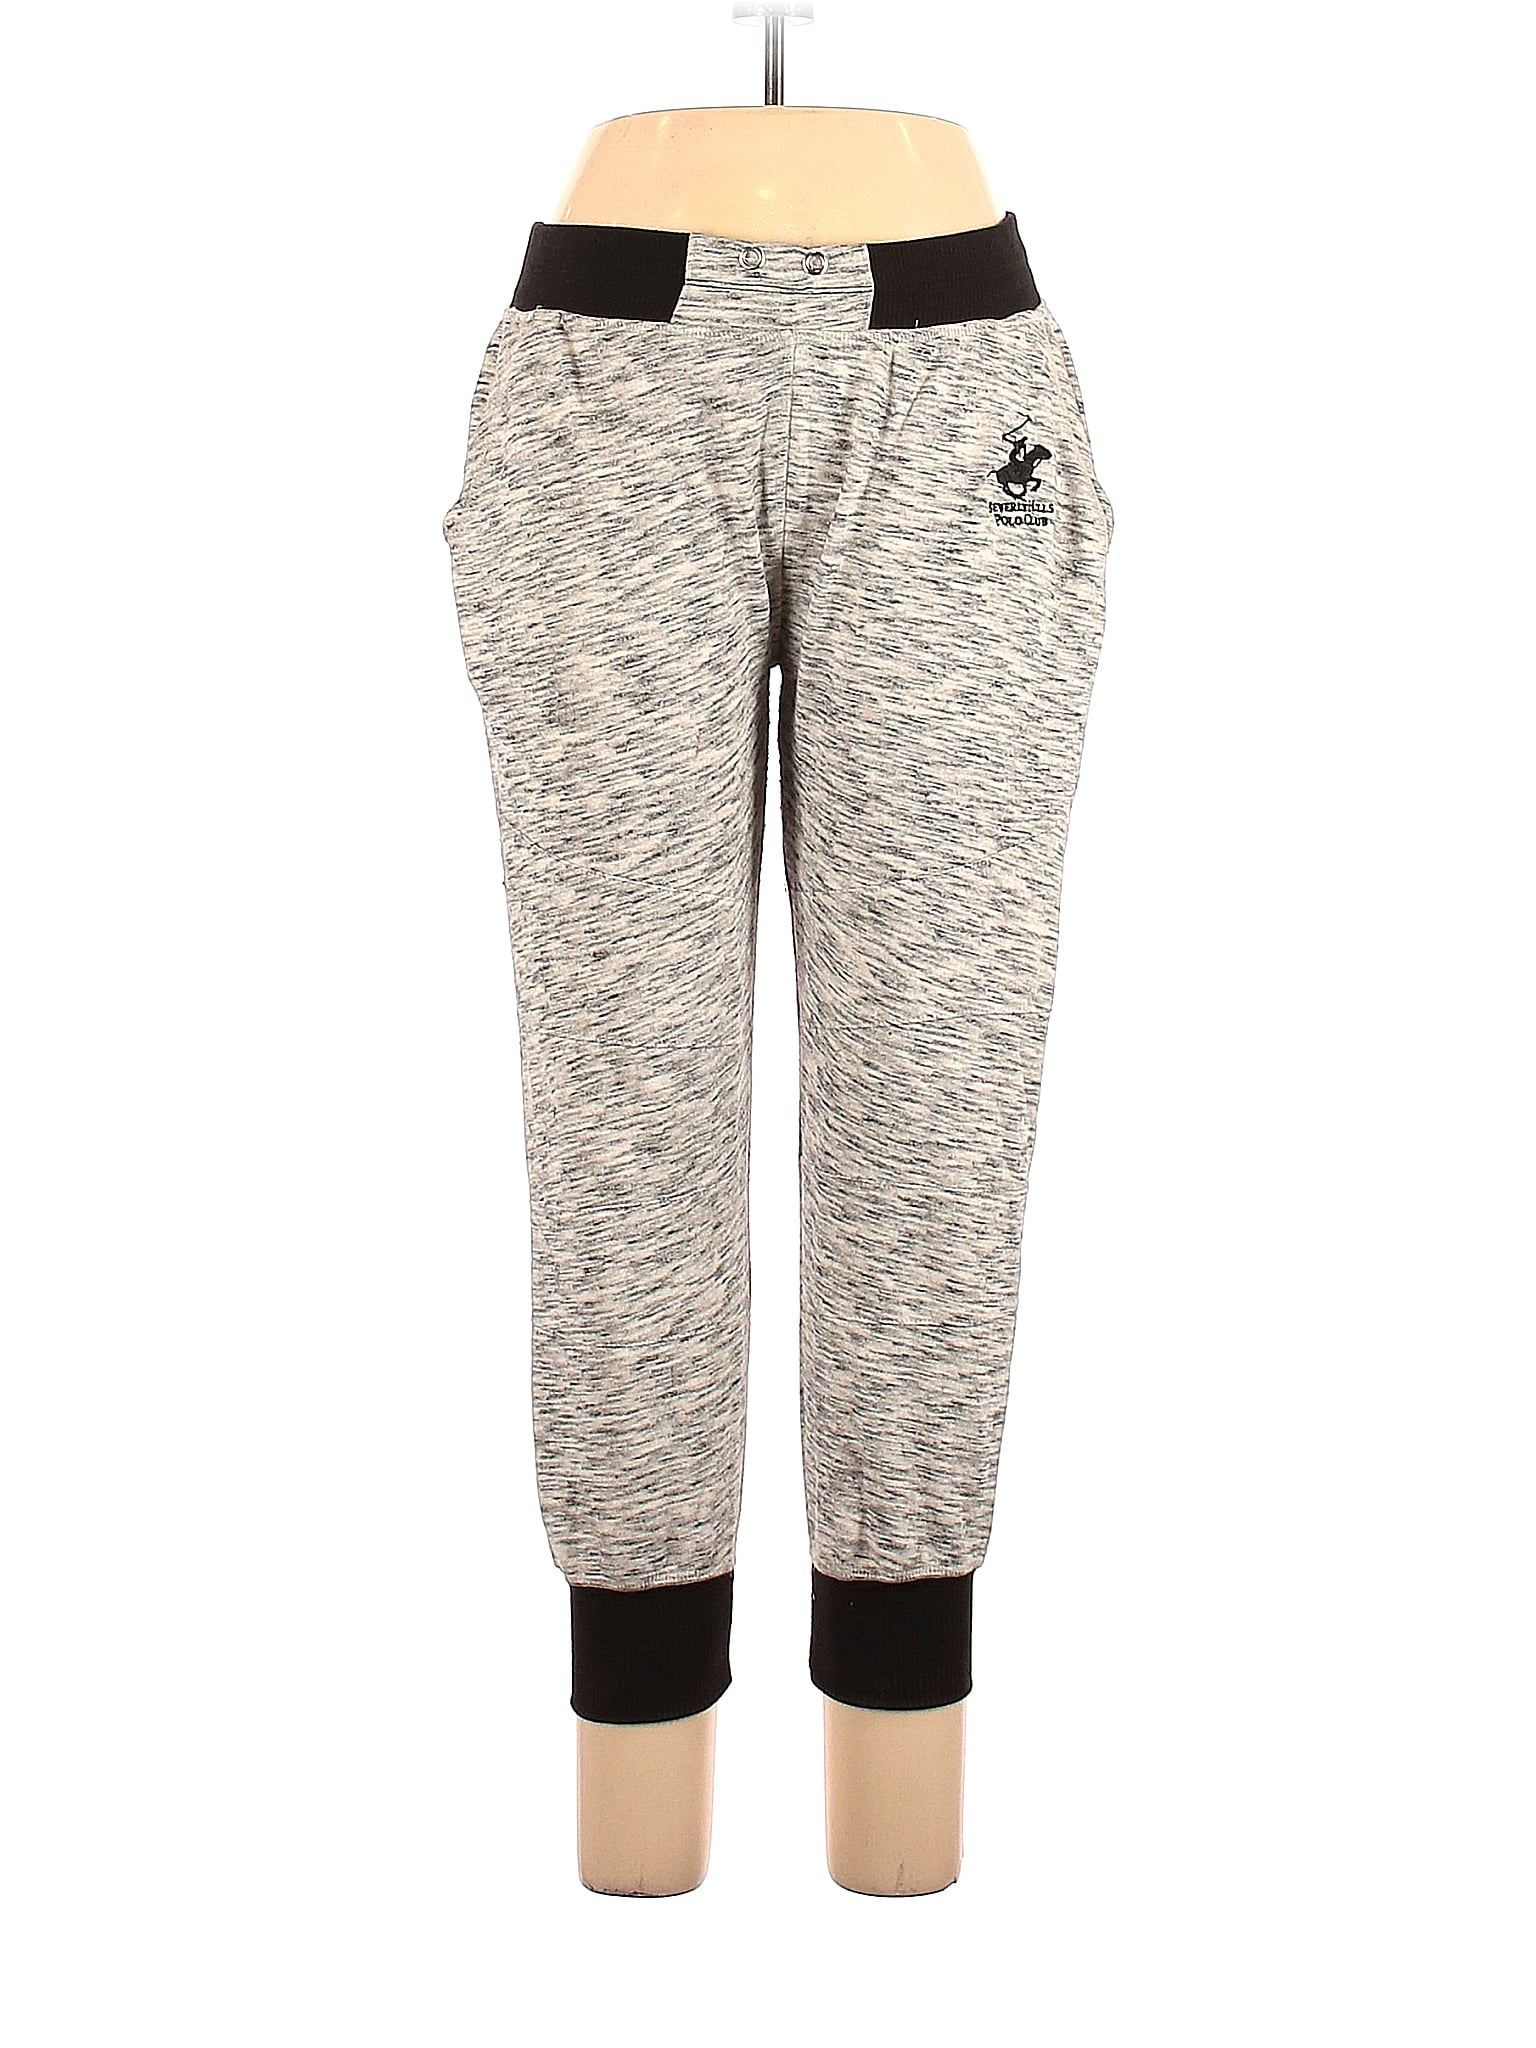 Beverly Hills Polo Club Womens Workout Sweatpants